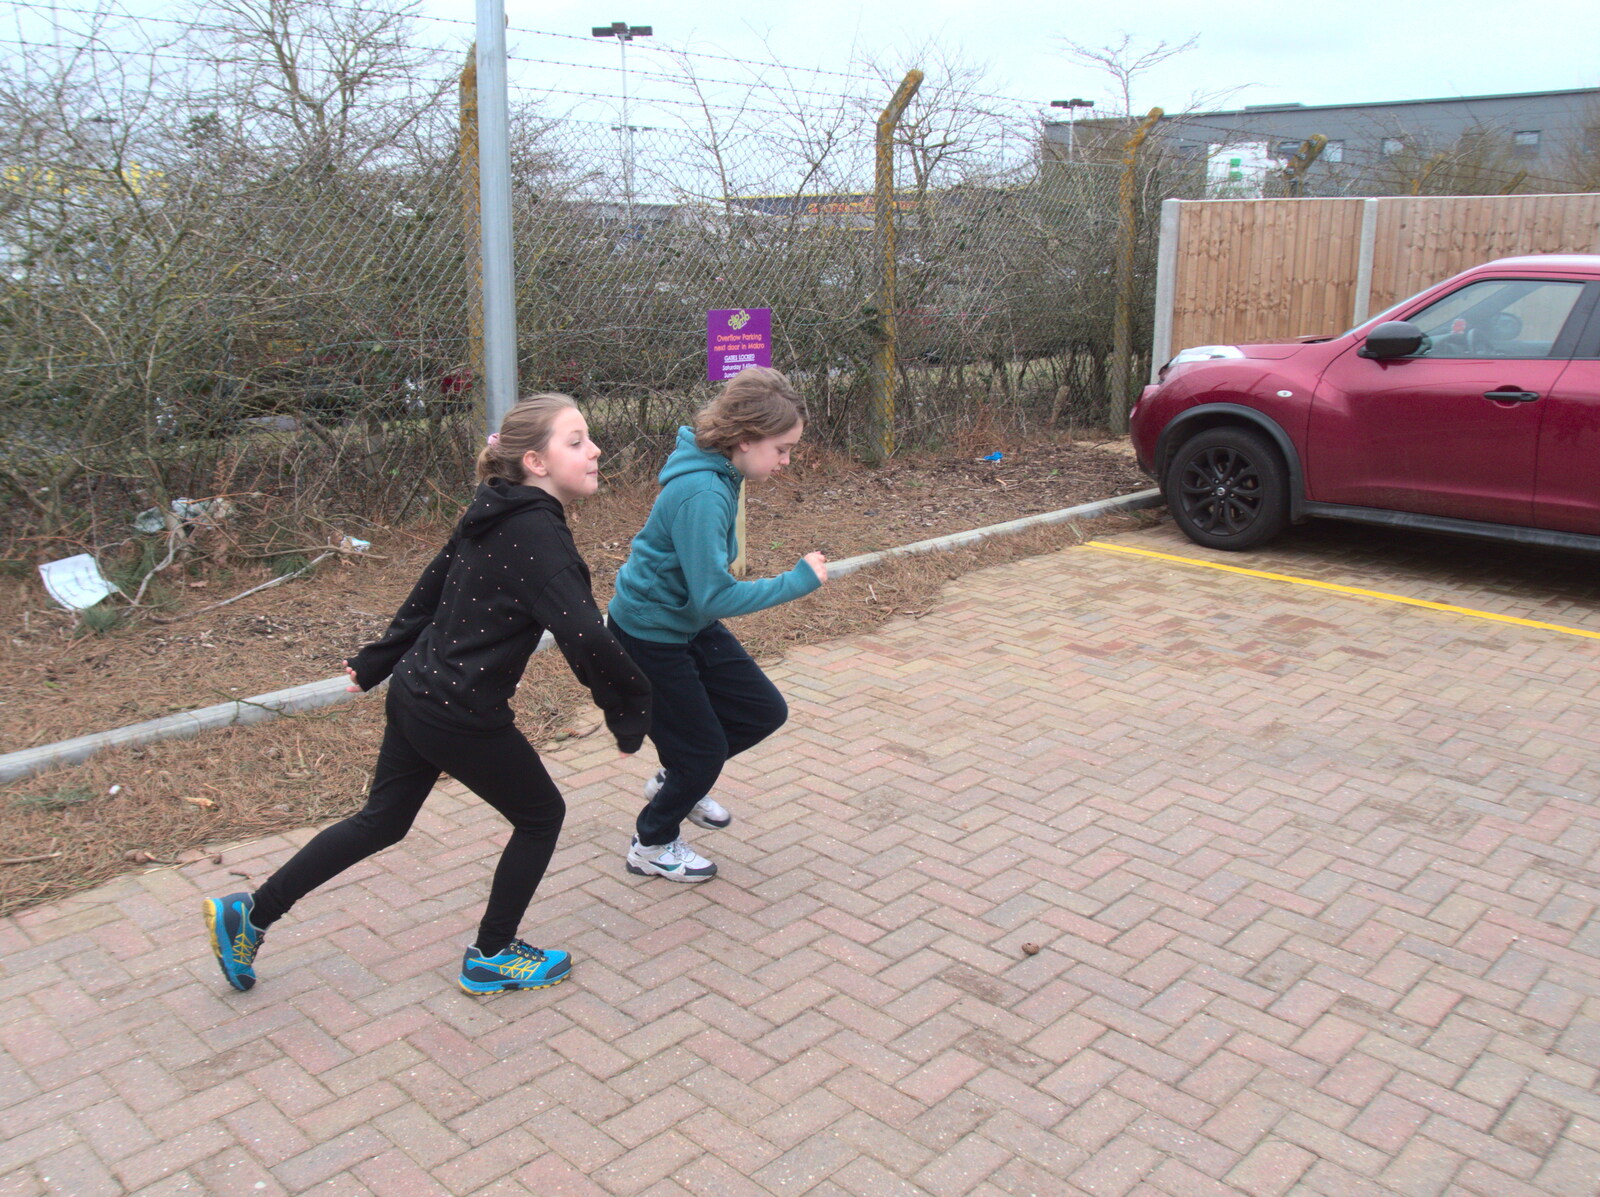 Sophie and Fred run around in the car park from Clip and Climb, The Havens, Ipswich - 15th February 2020